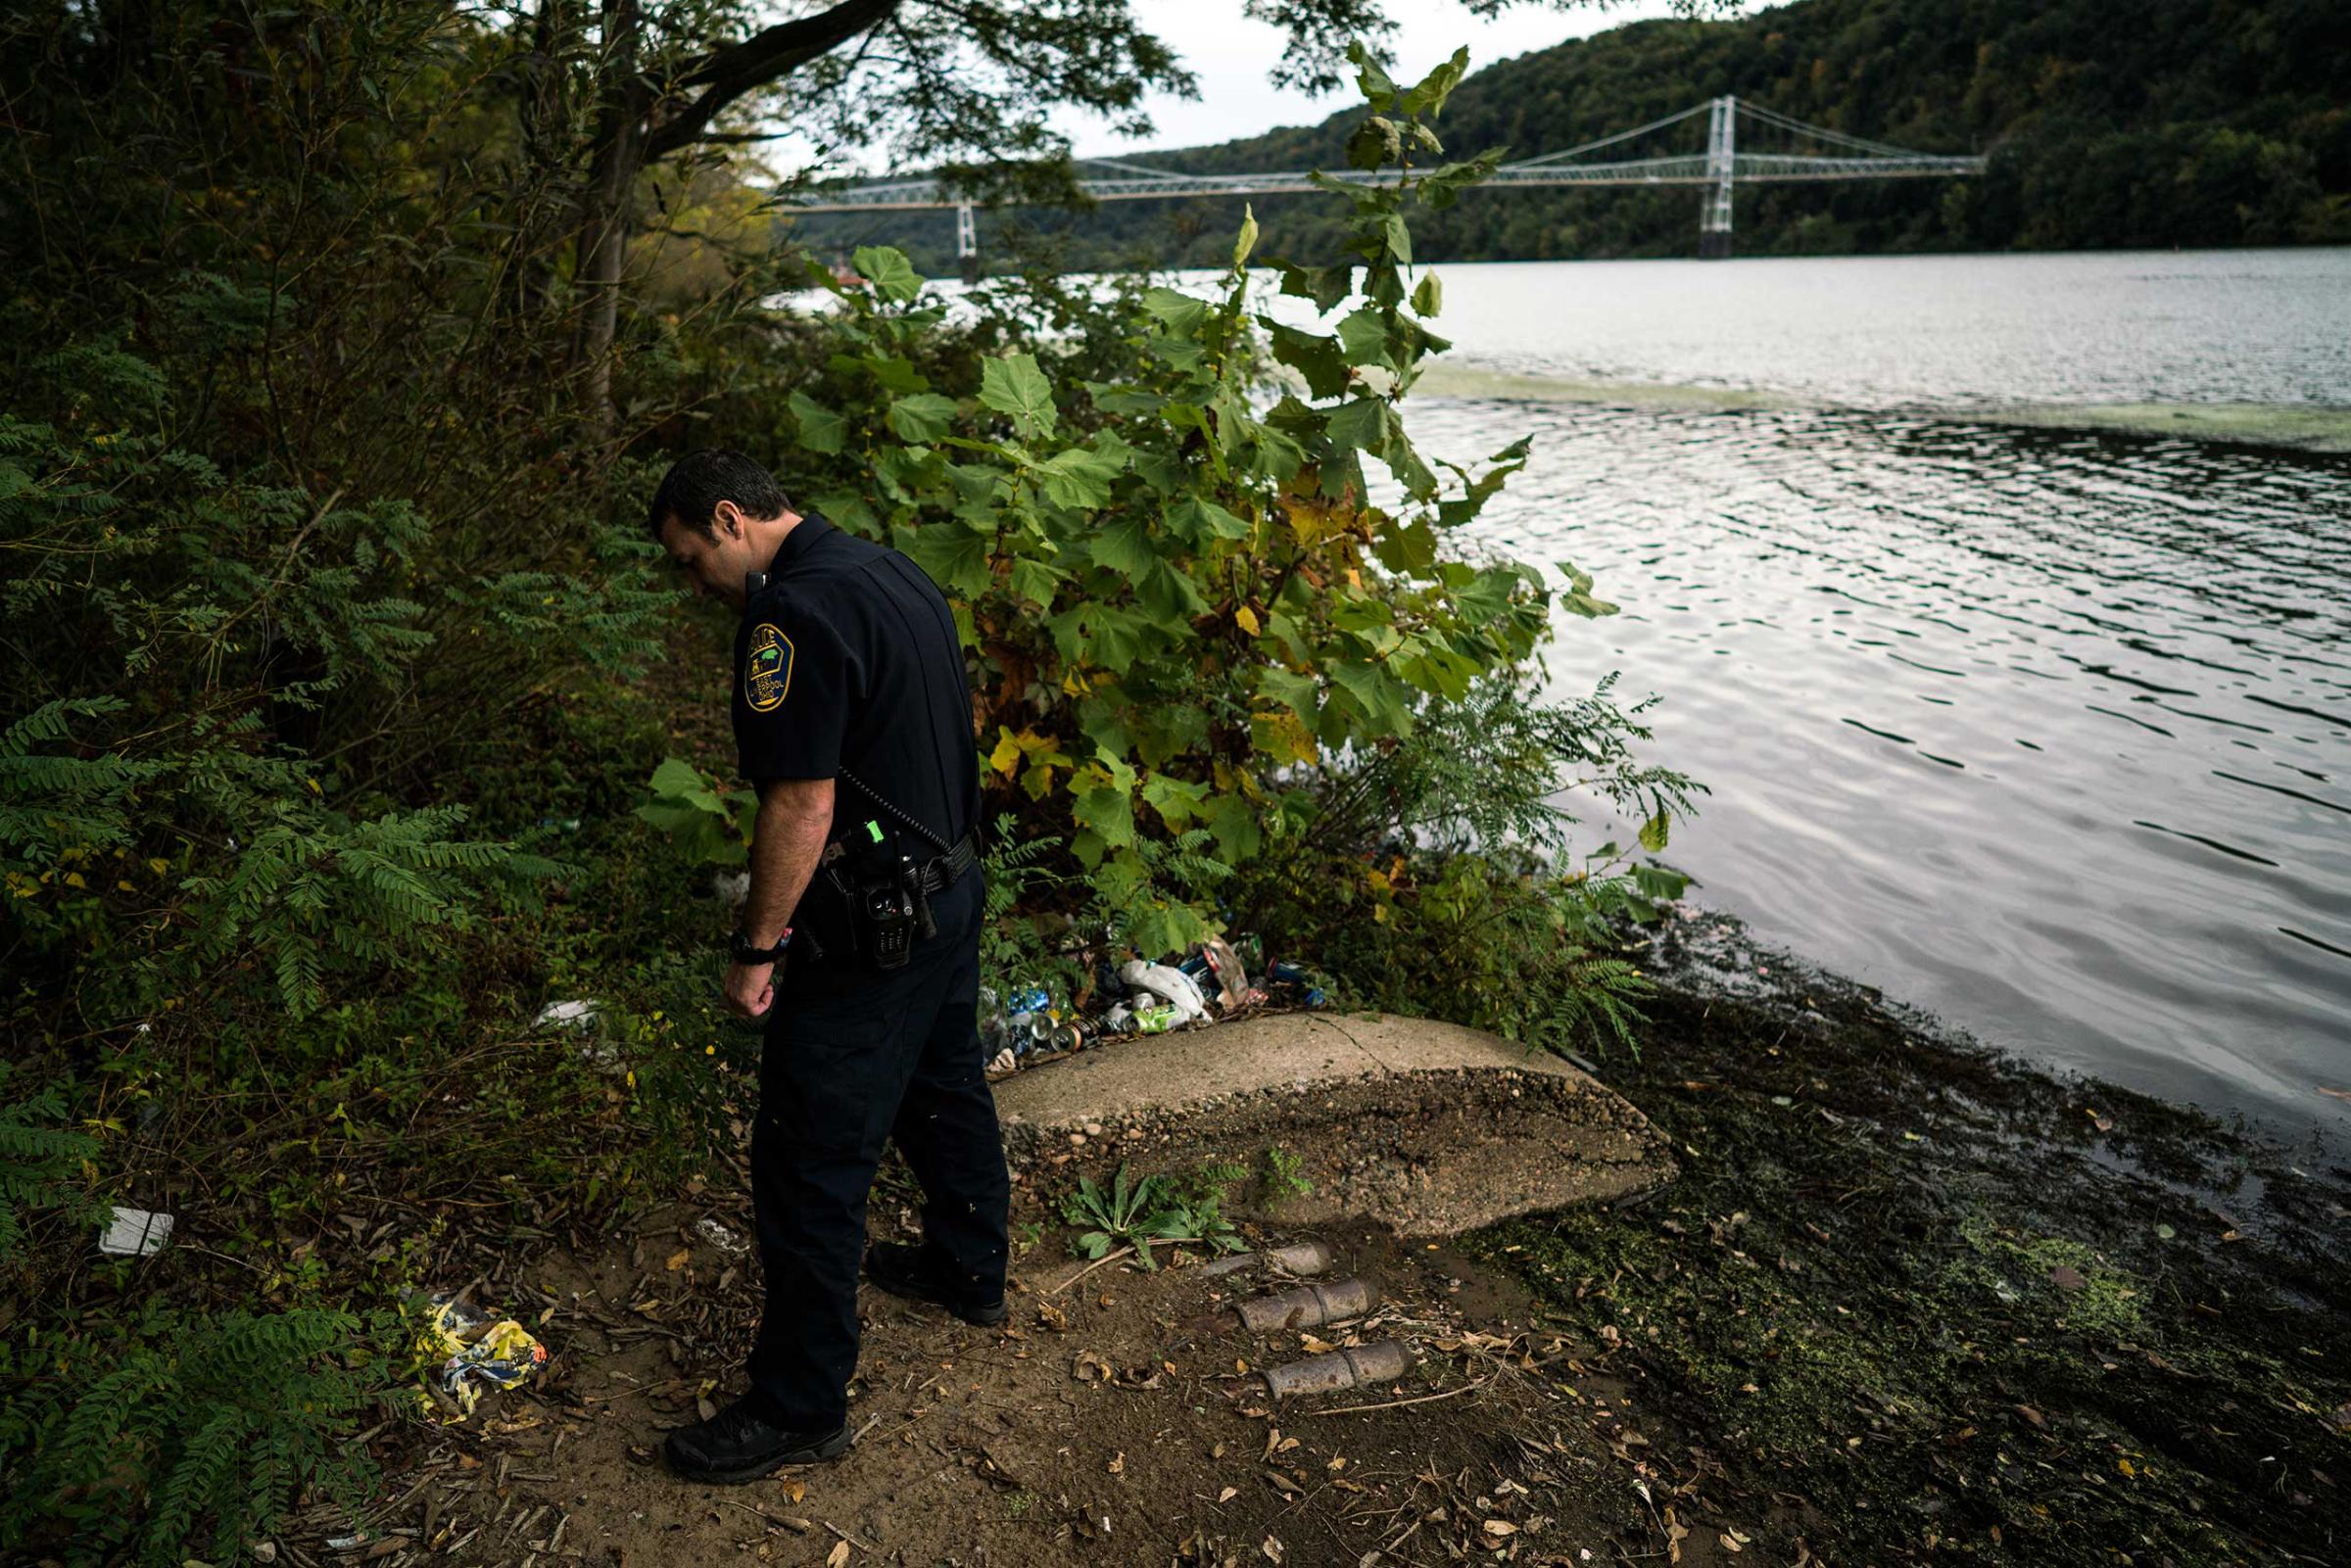 A patrolman searches for syringes and abandoned drug paraphernalia along the shore of the Ohio River in East Liverpool, Ohio, on Oct. 8, 2016.